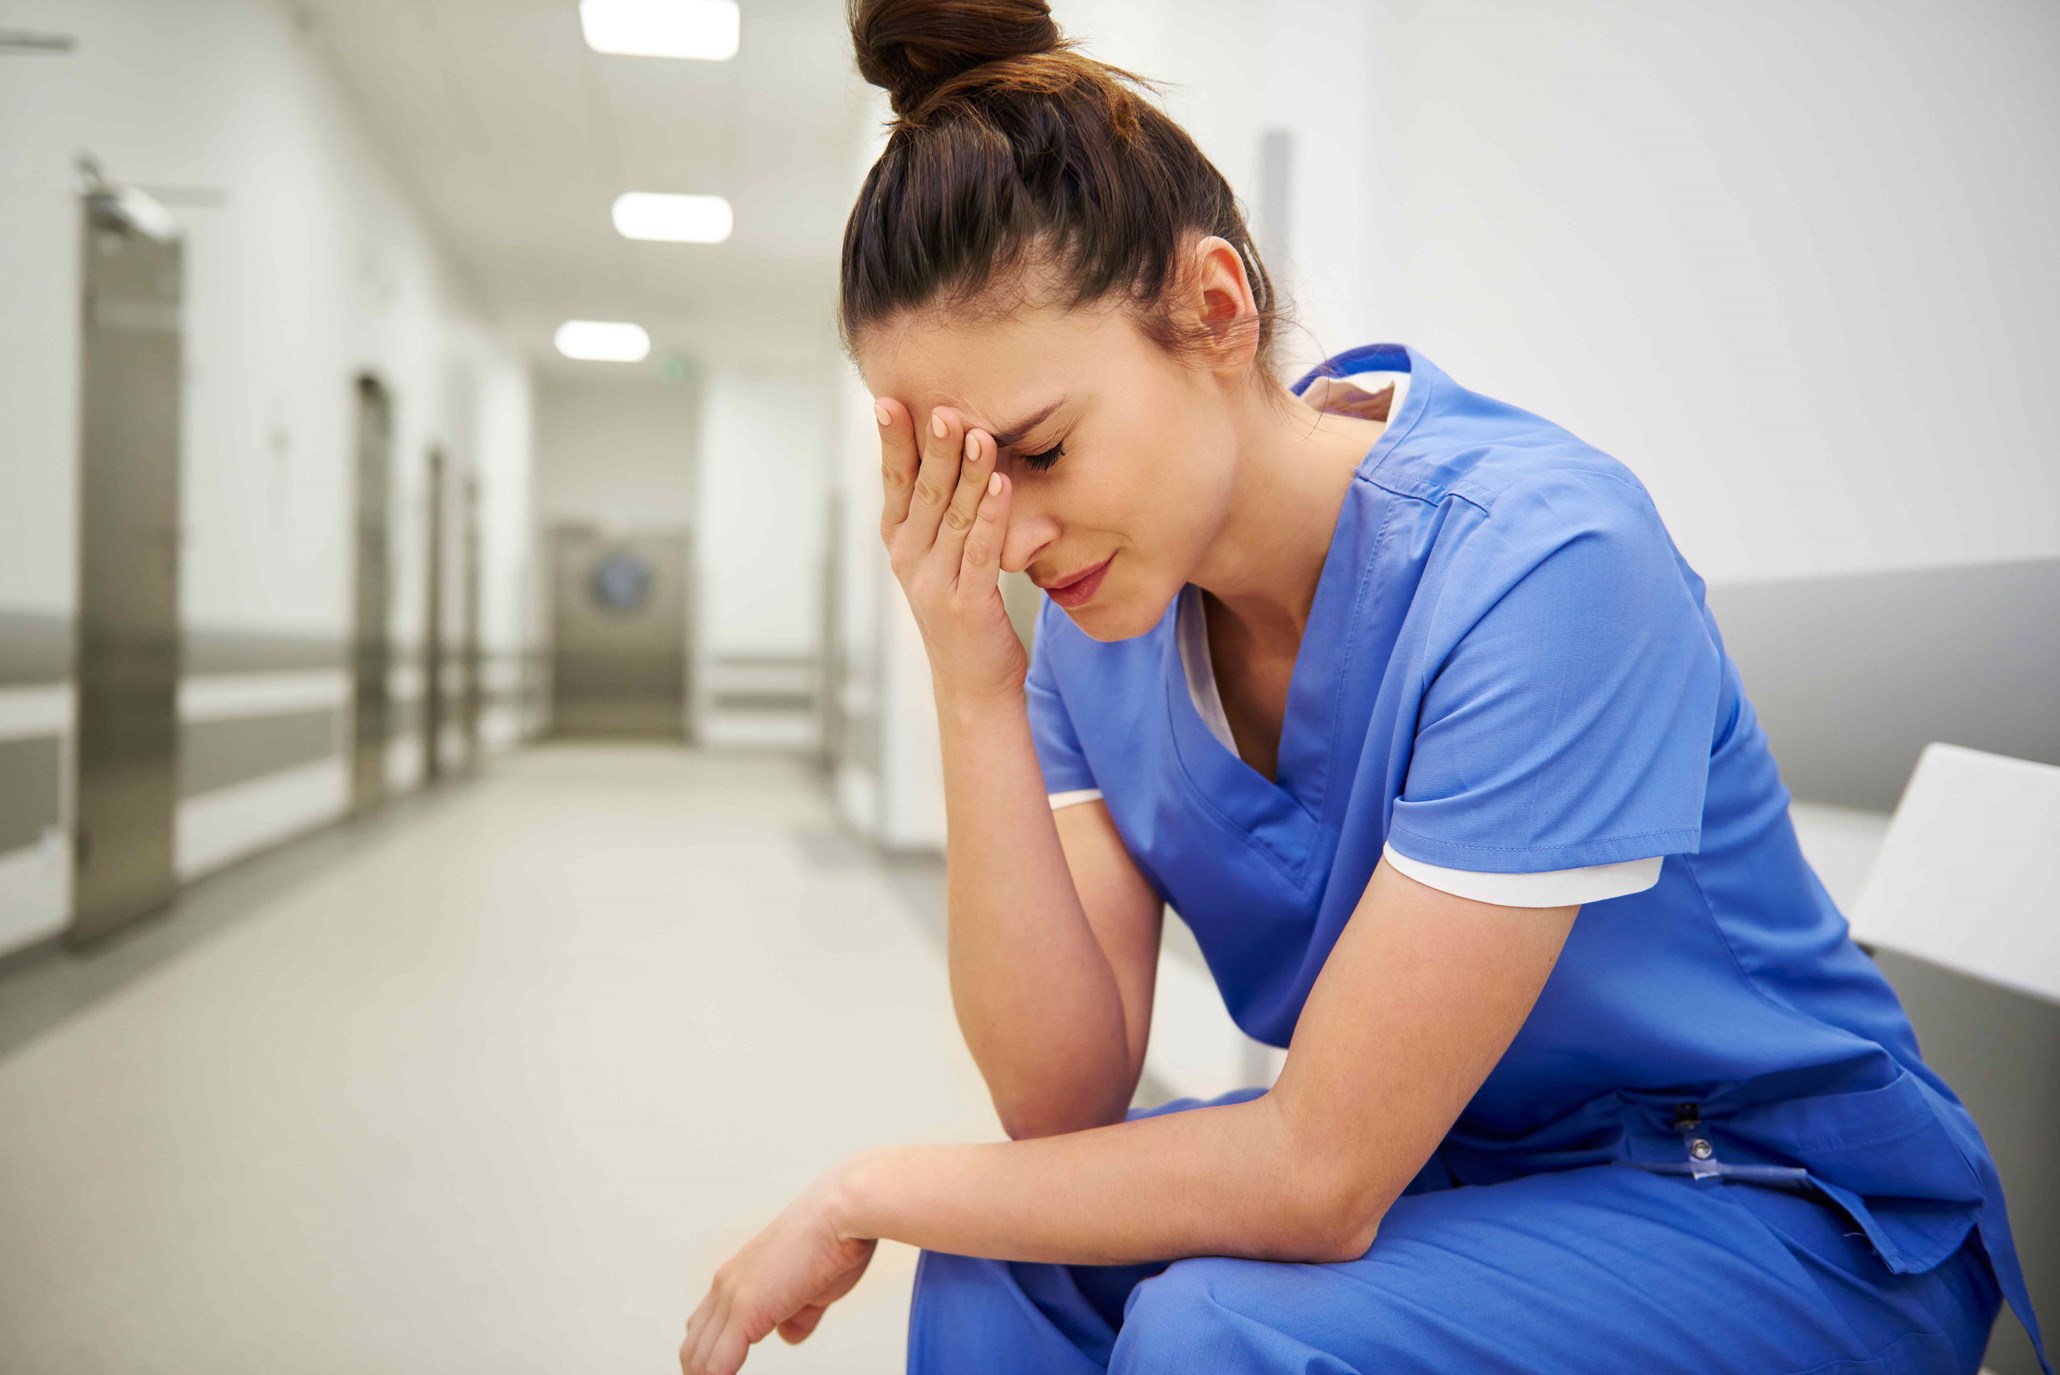 Tired nurse sitting with her head down in hospital hallway